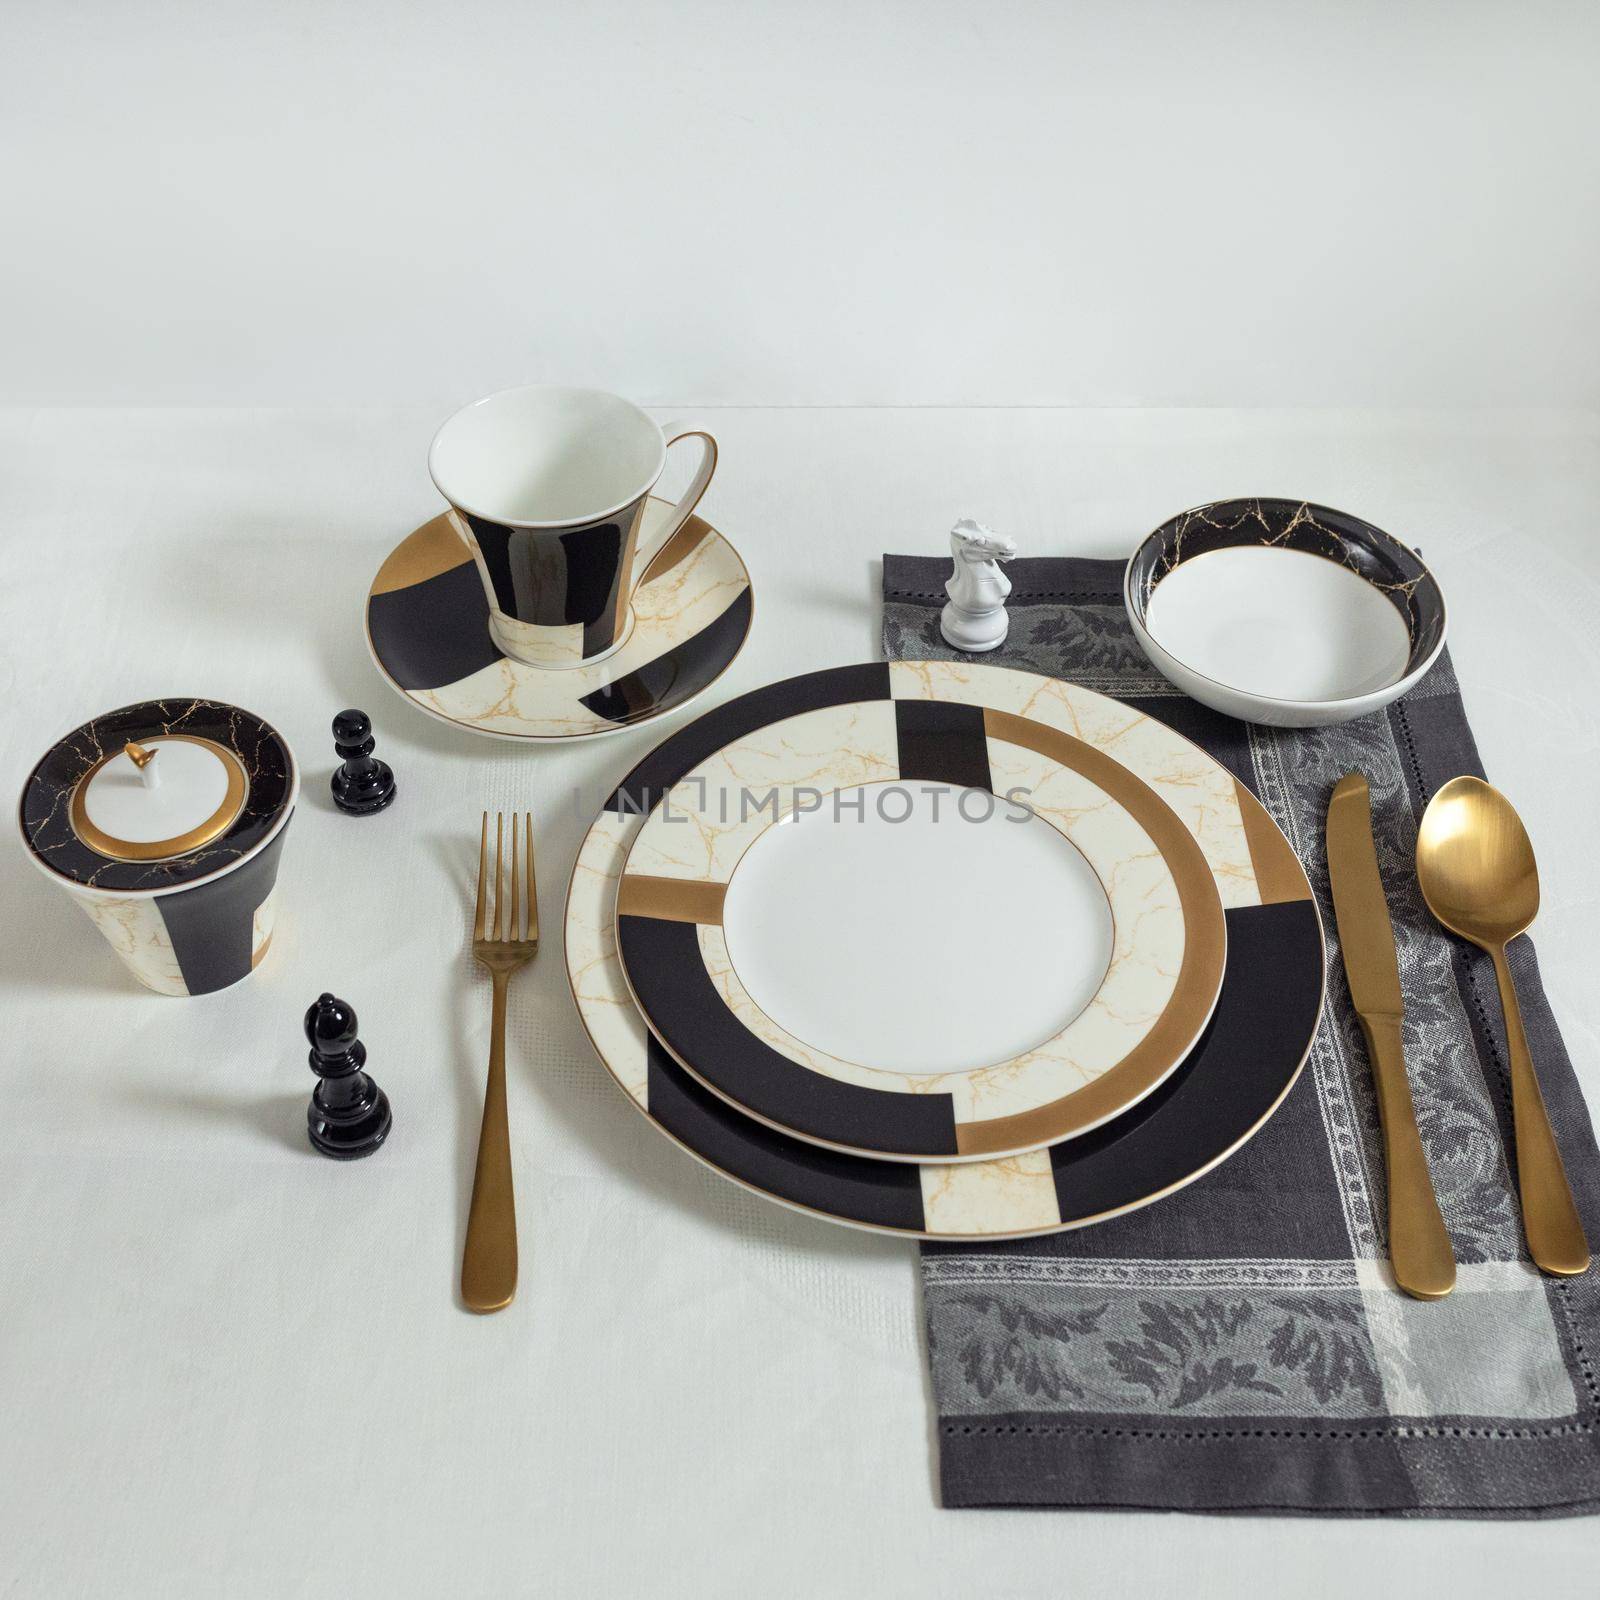 Set of clean tableware, dishes, plates, utensils on the table